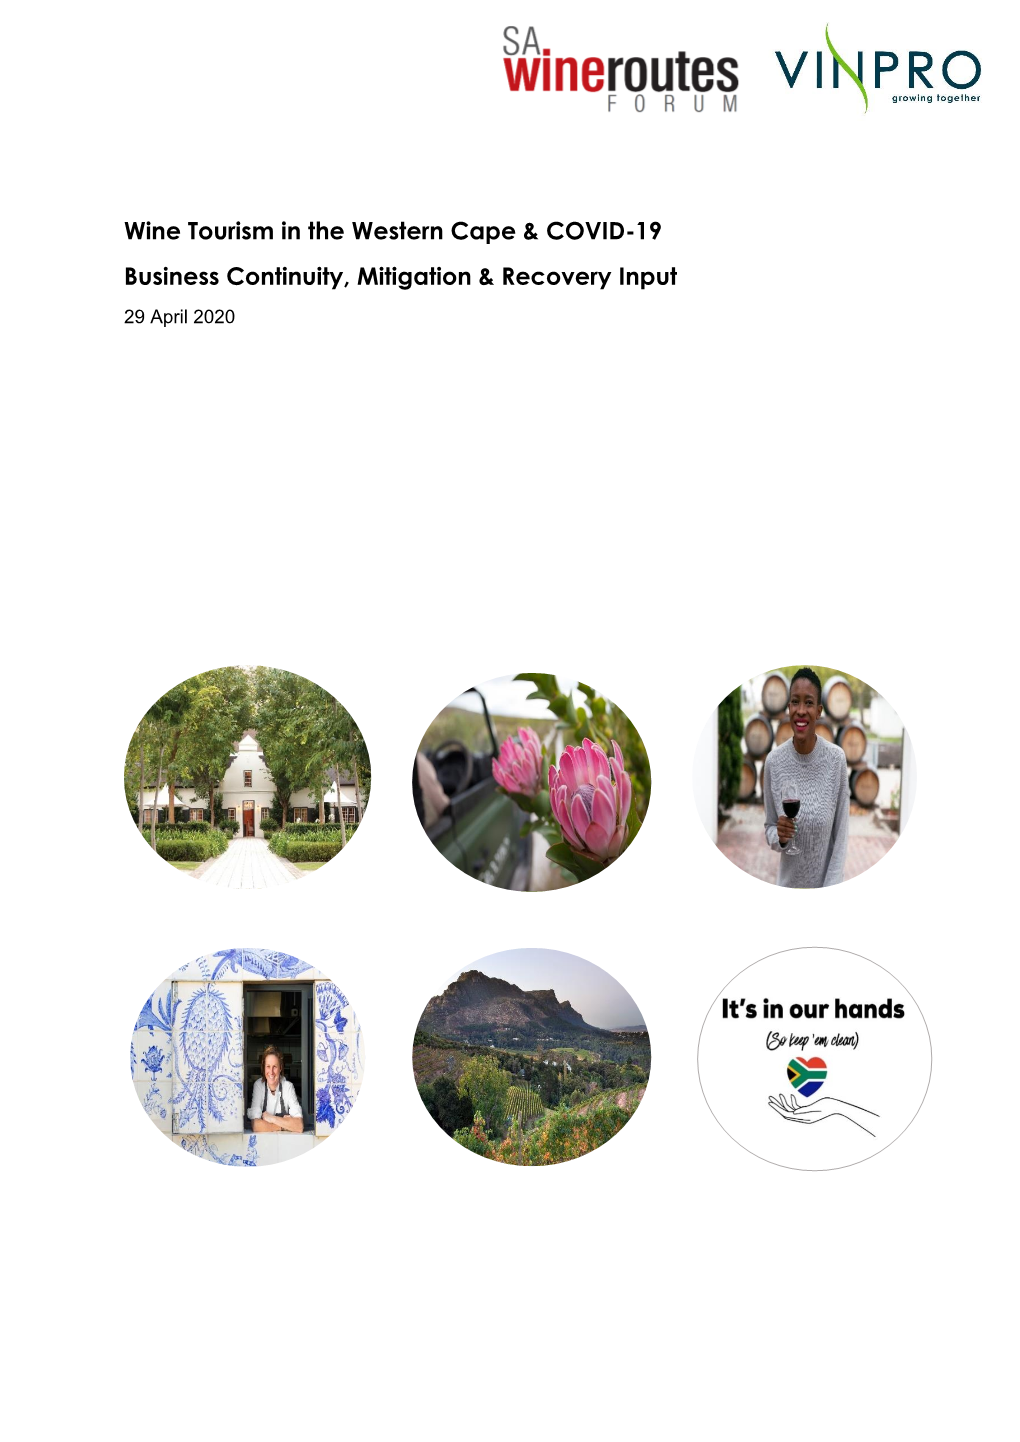 Wine Tourism in the Western Cape & COVID-19 Business Continuity